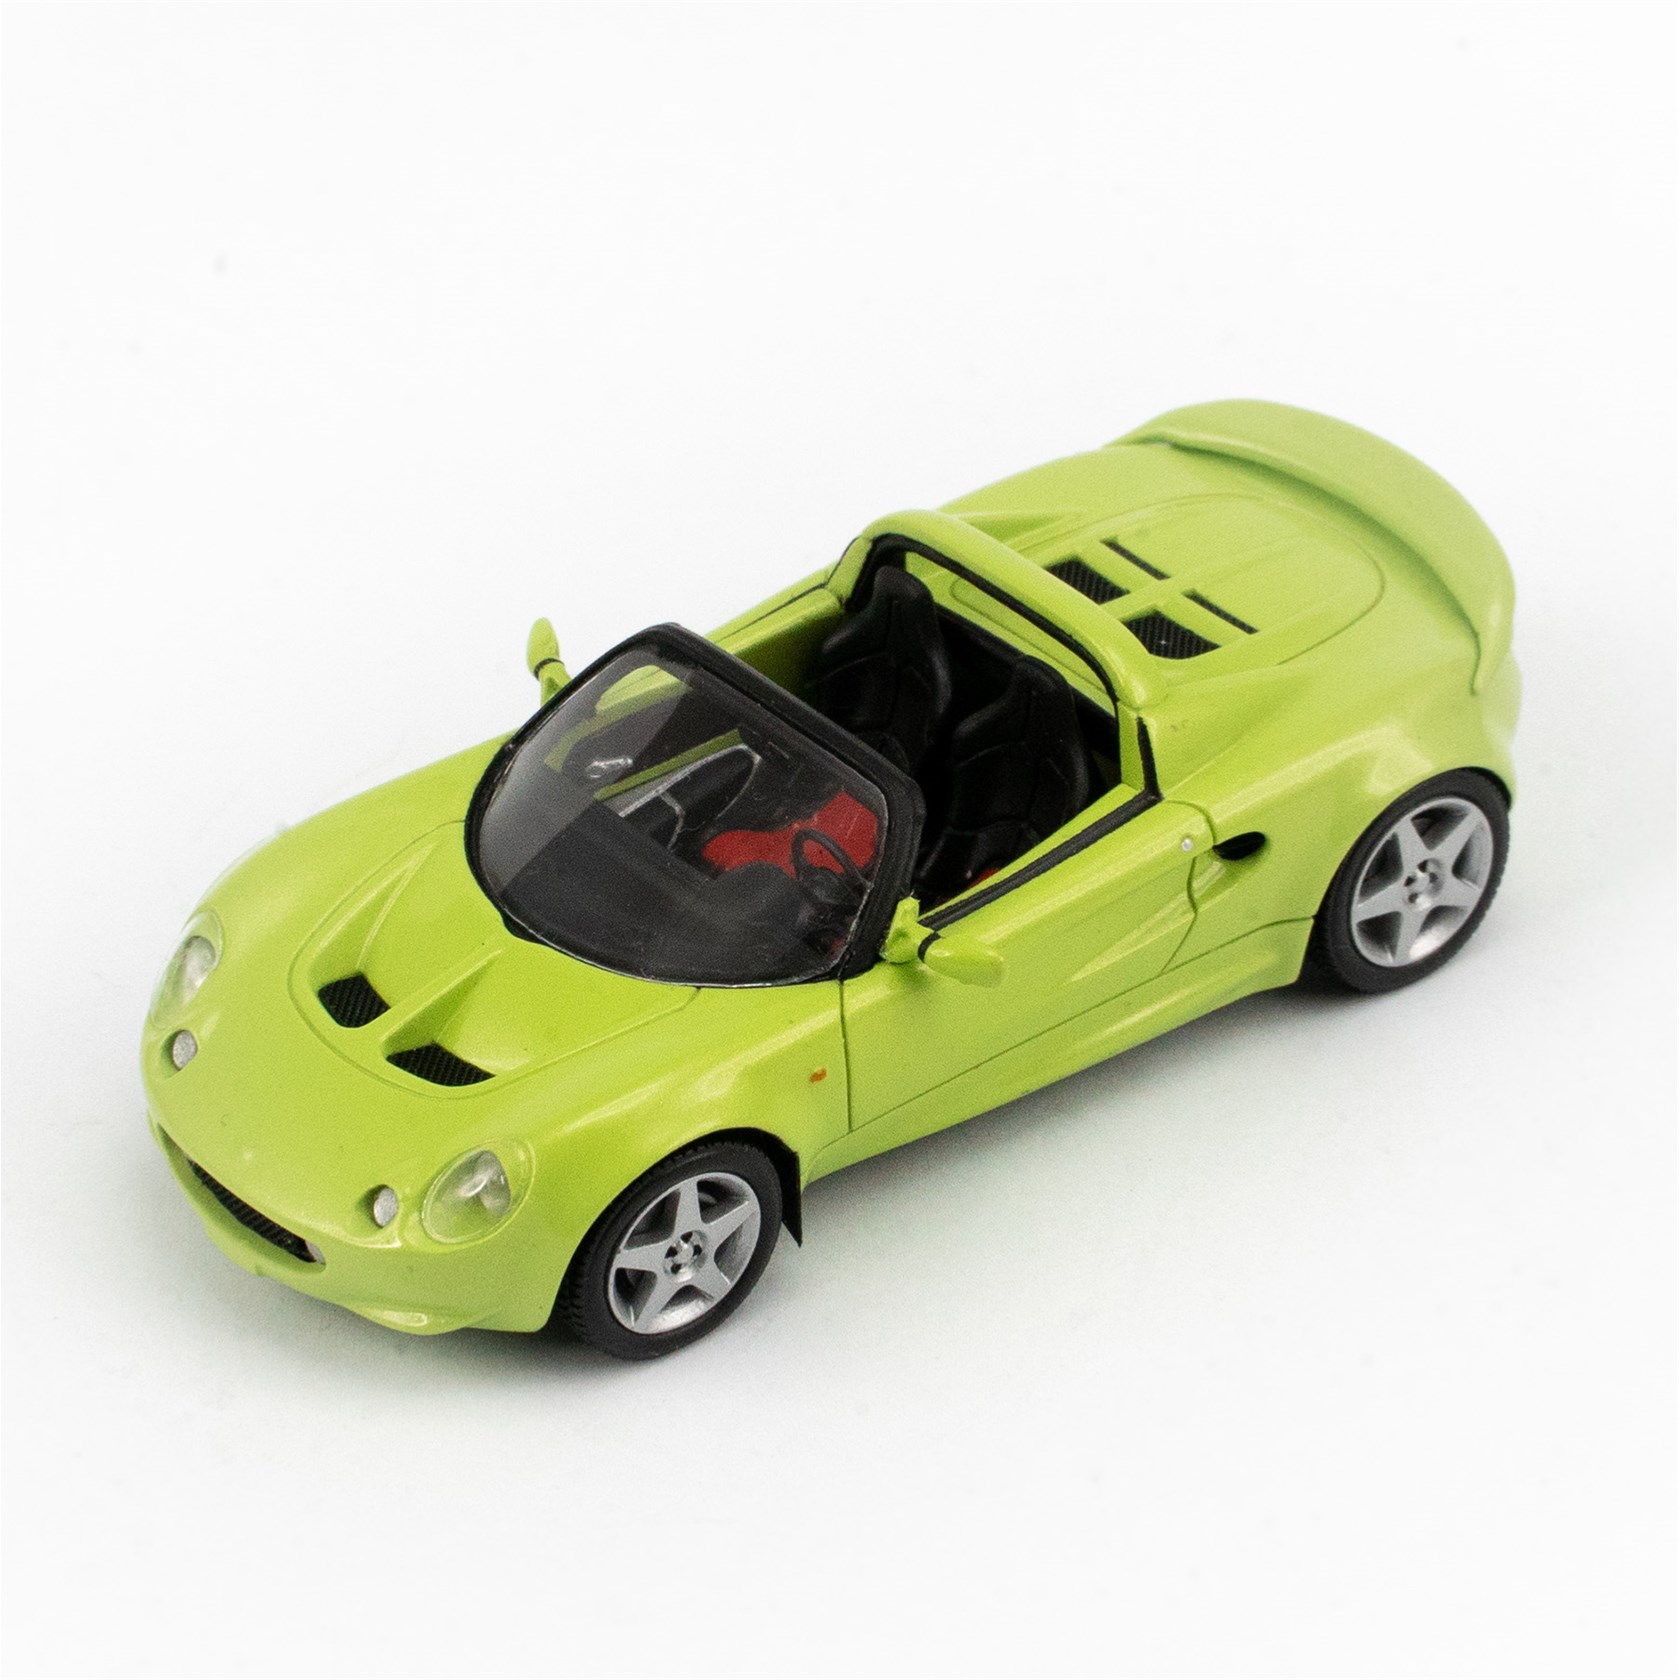 WOW EXTREMELY RARE Lotus Elise S1 LHD Sott Top 1997 BR Green 1:43 Vitesse-Spark